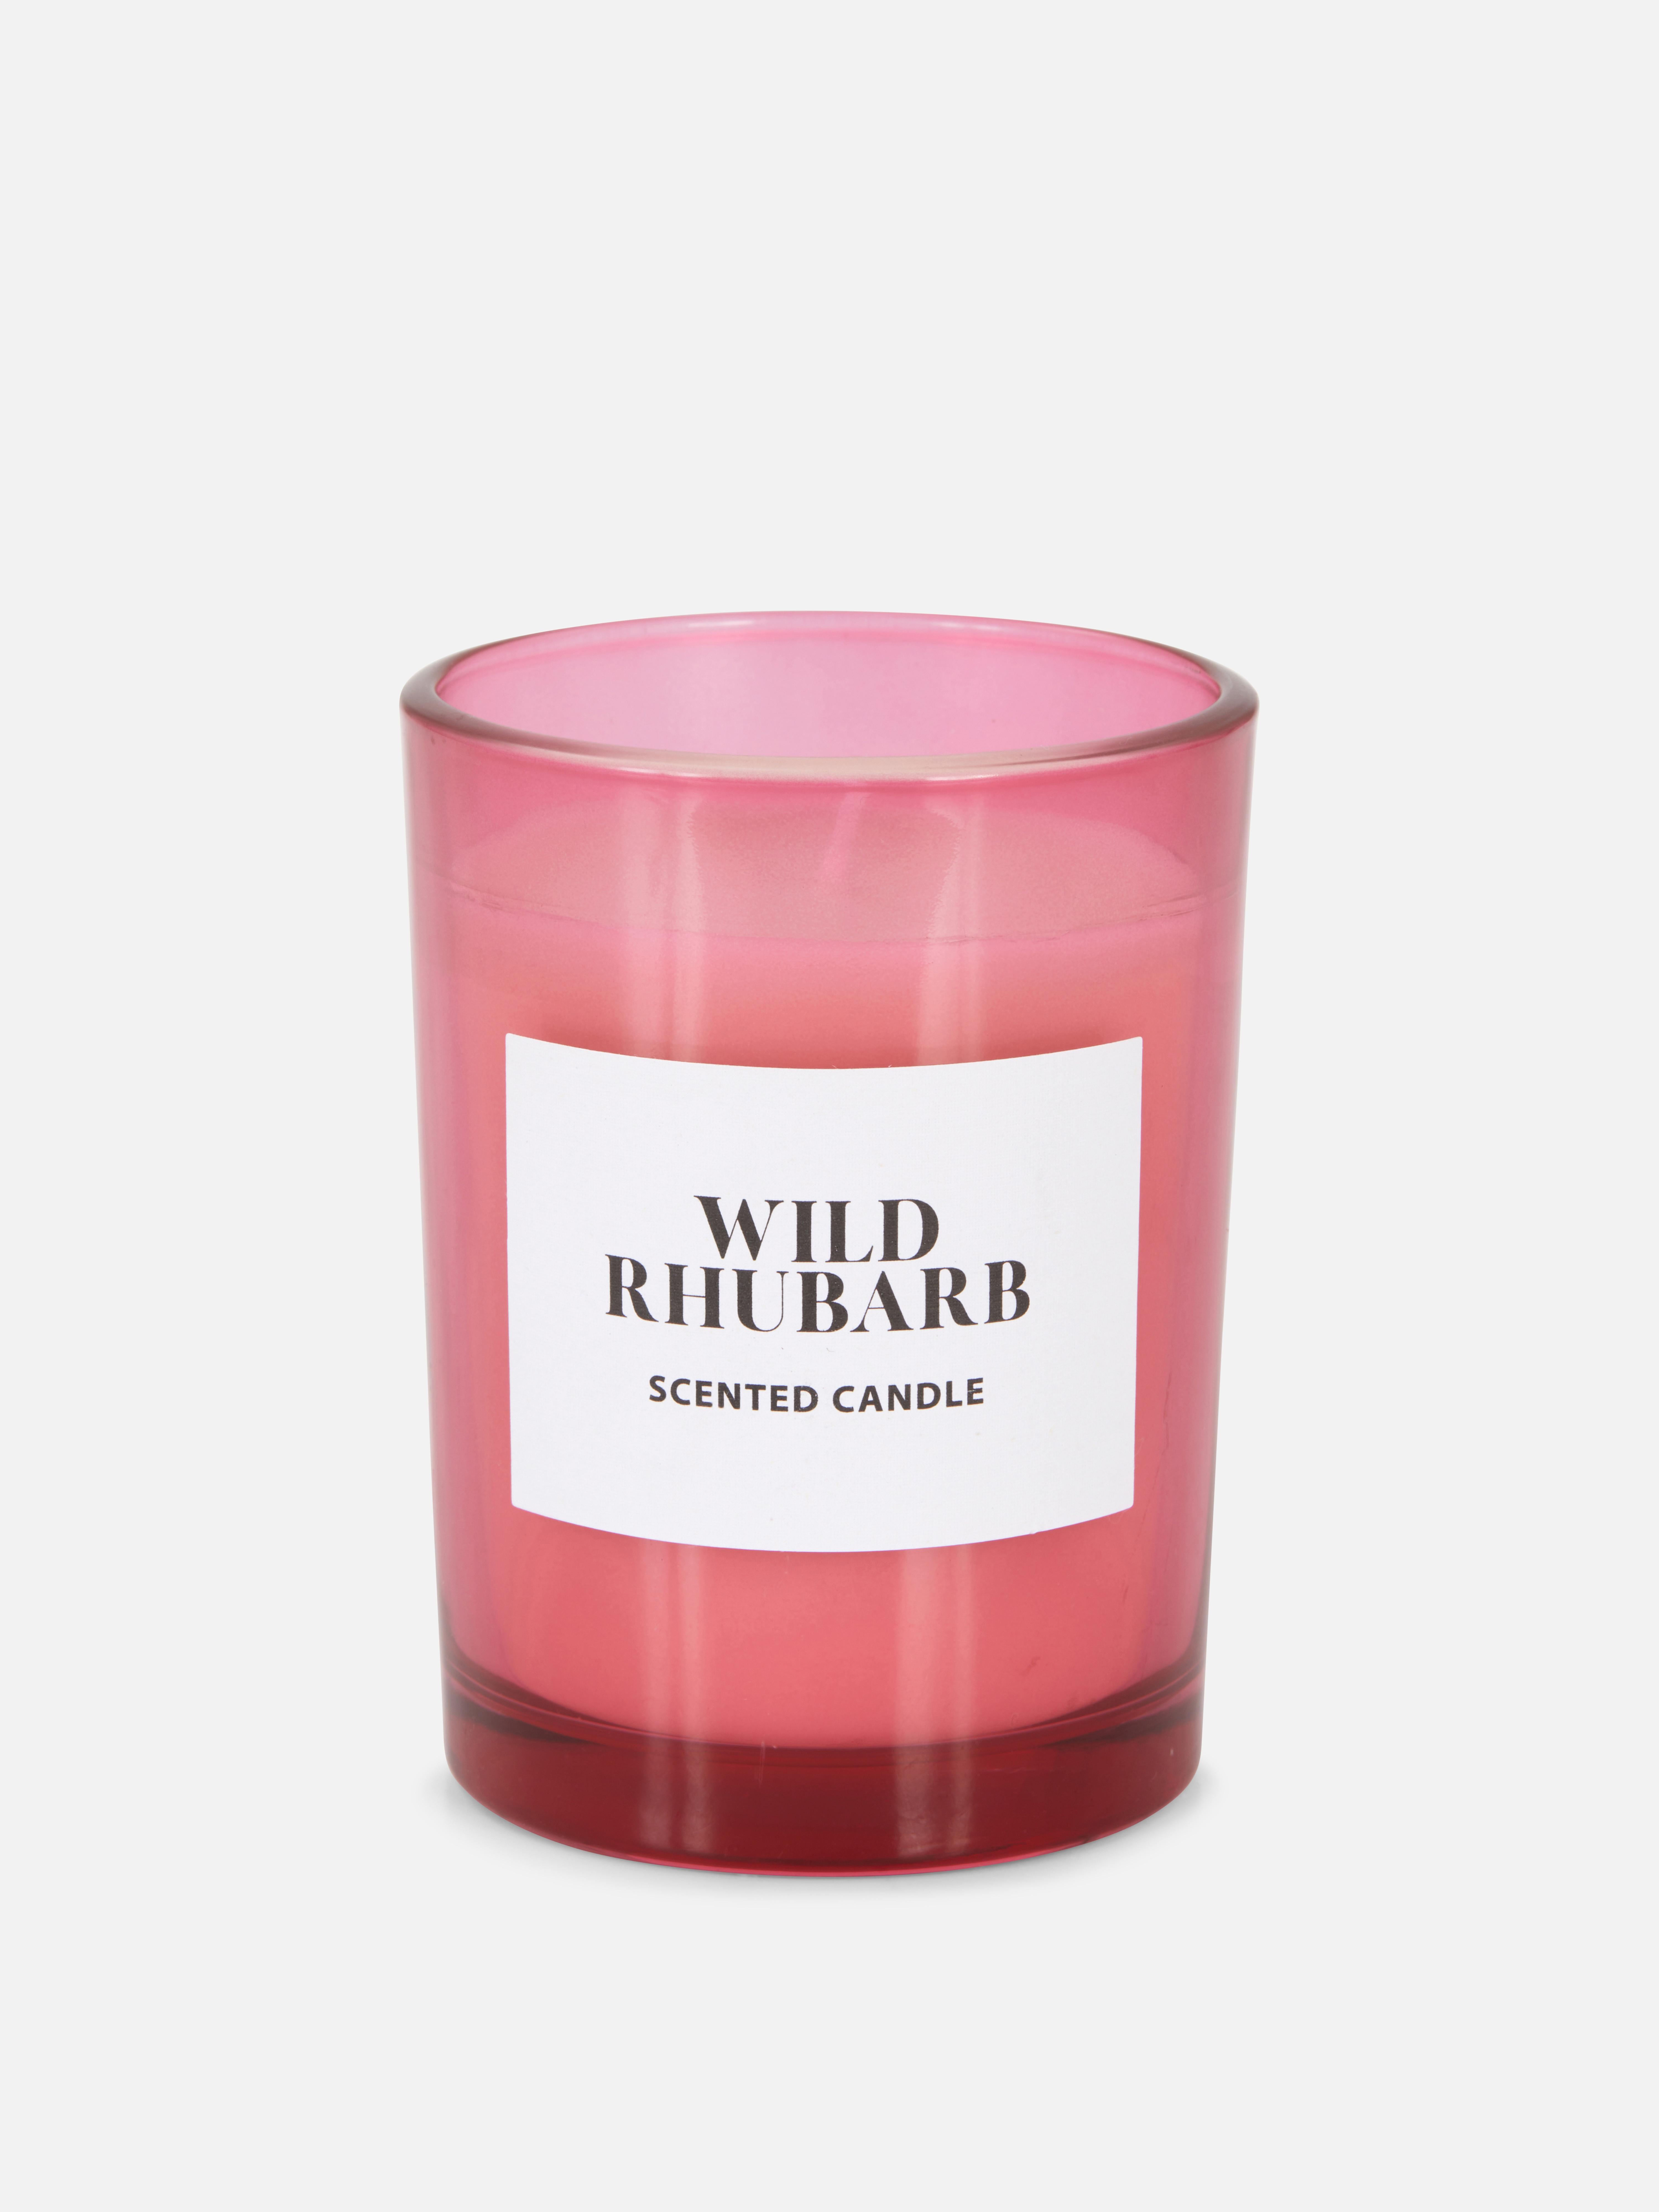 Wild Rhubarb Scented Candle